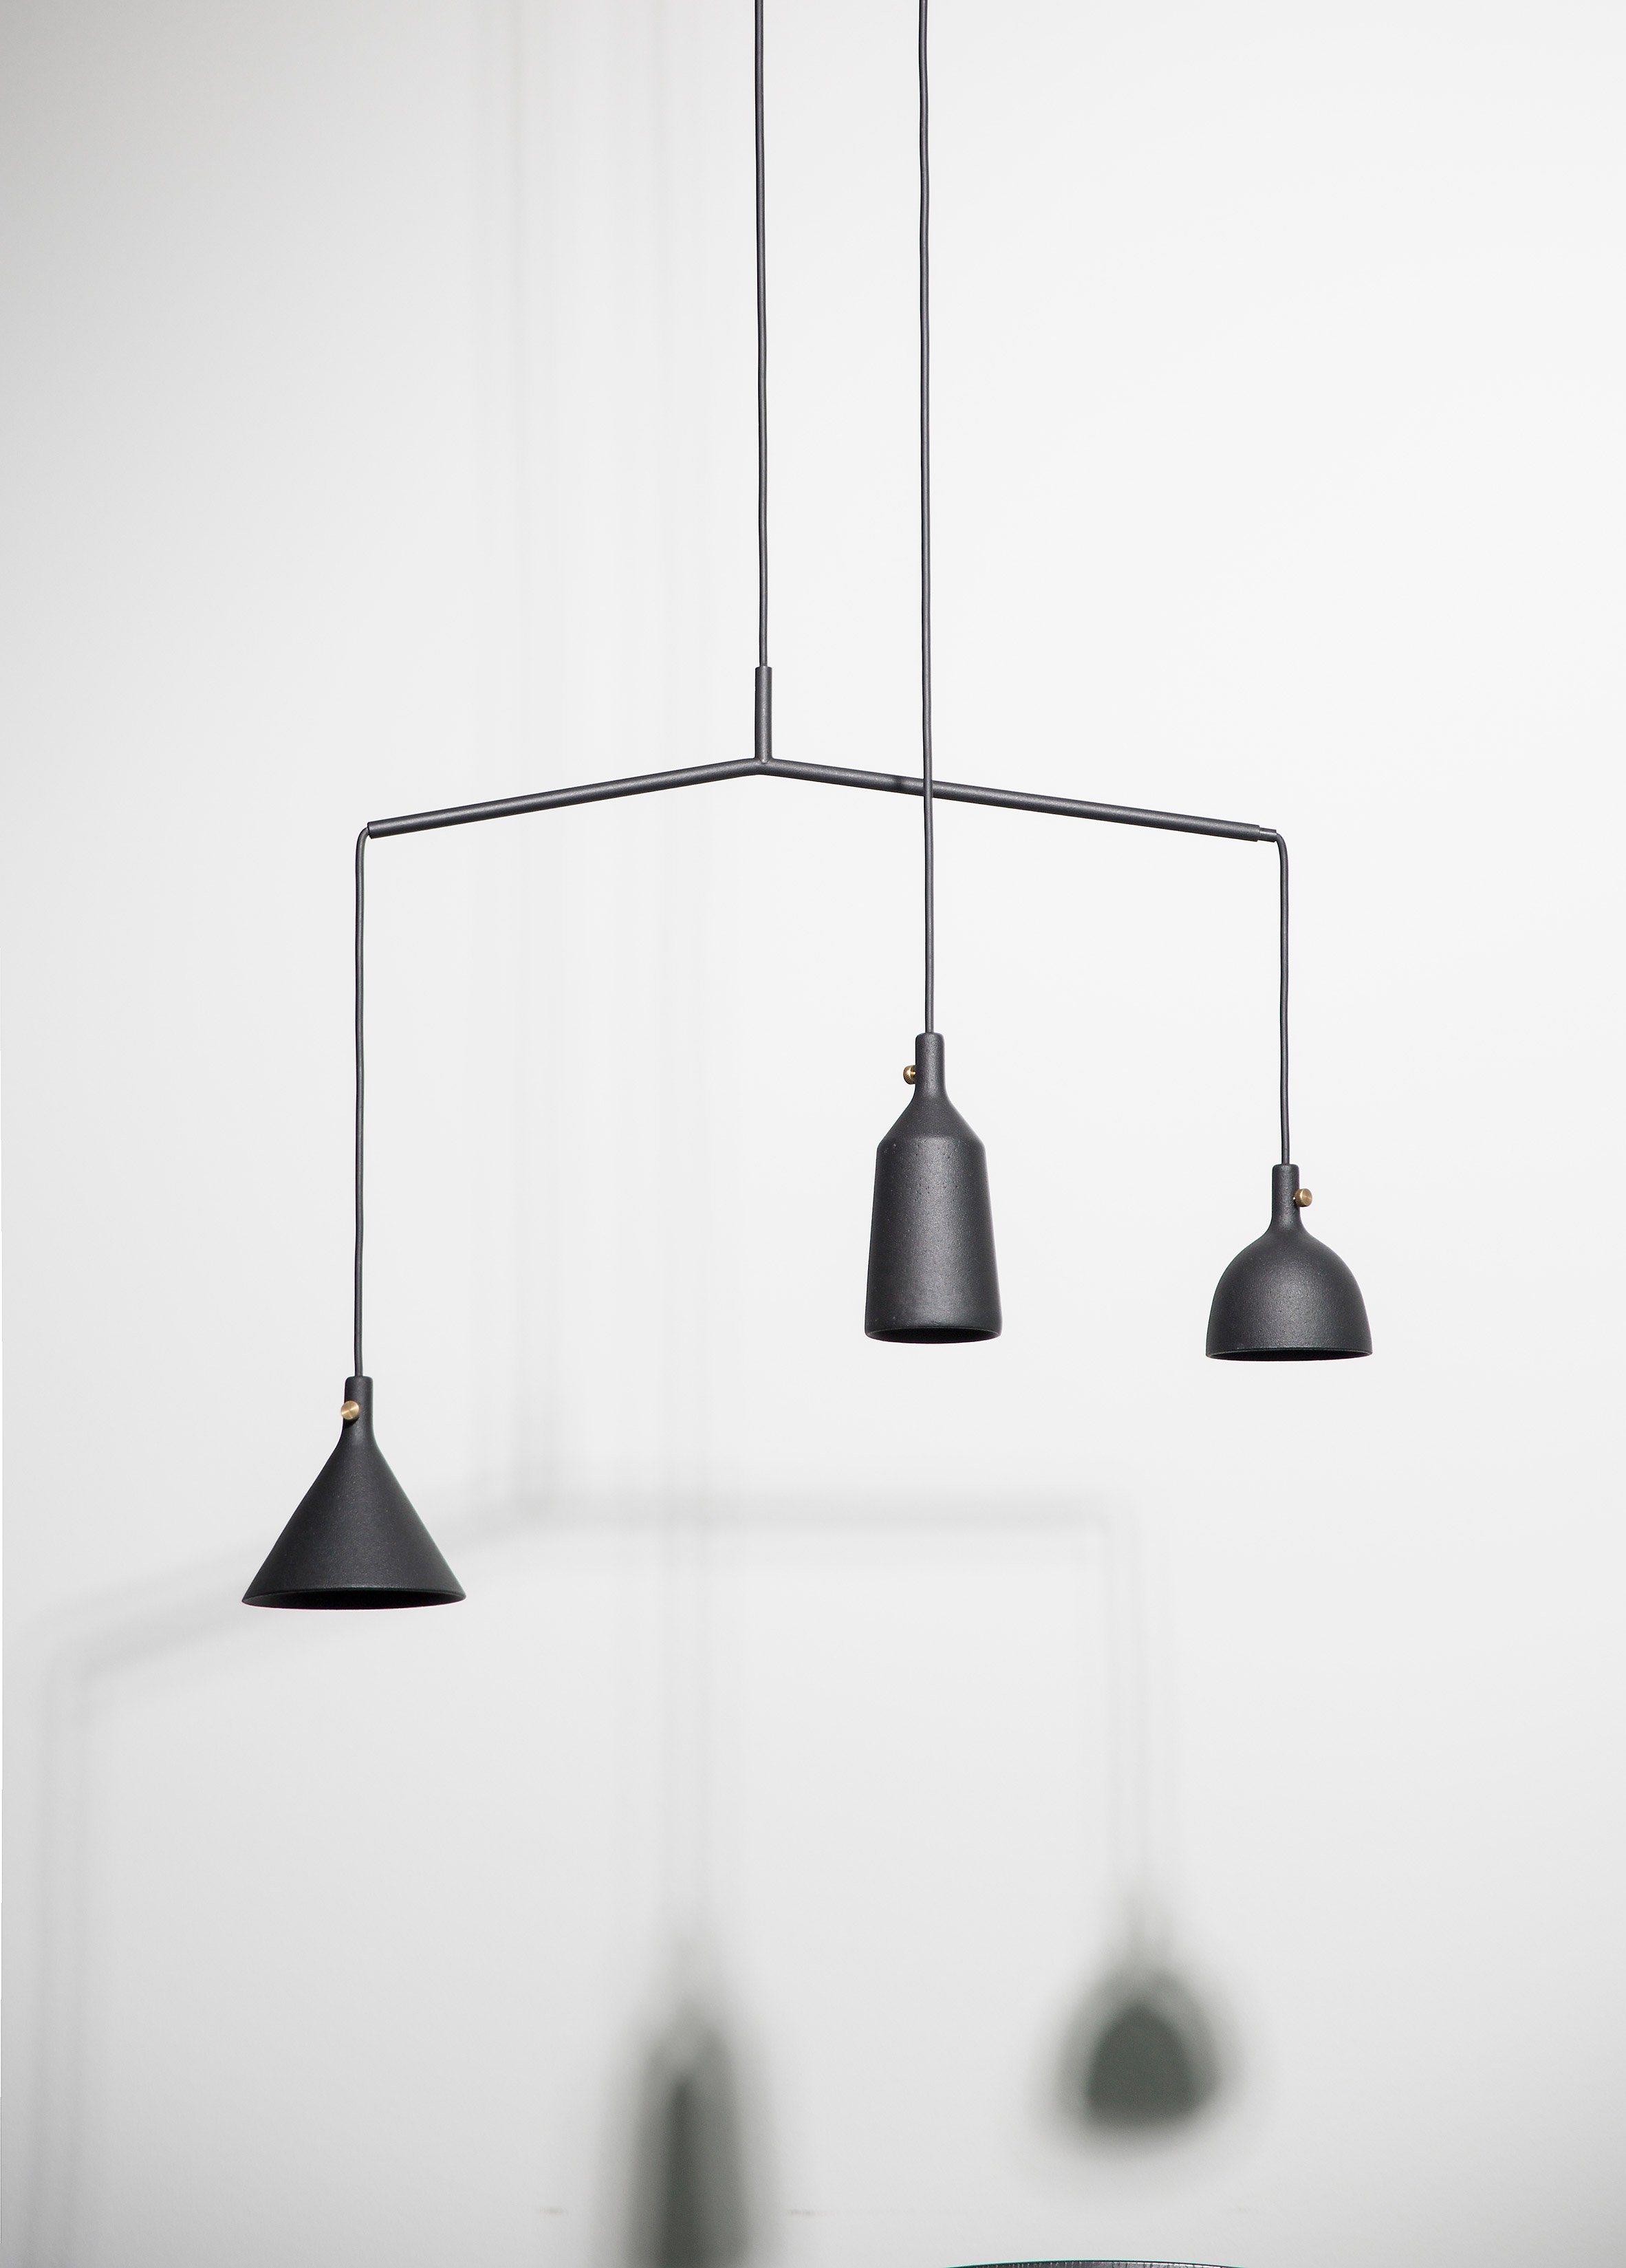 This lamp has an eye catchy asymmetrical design and comes in timeless black